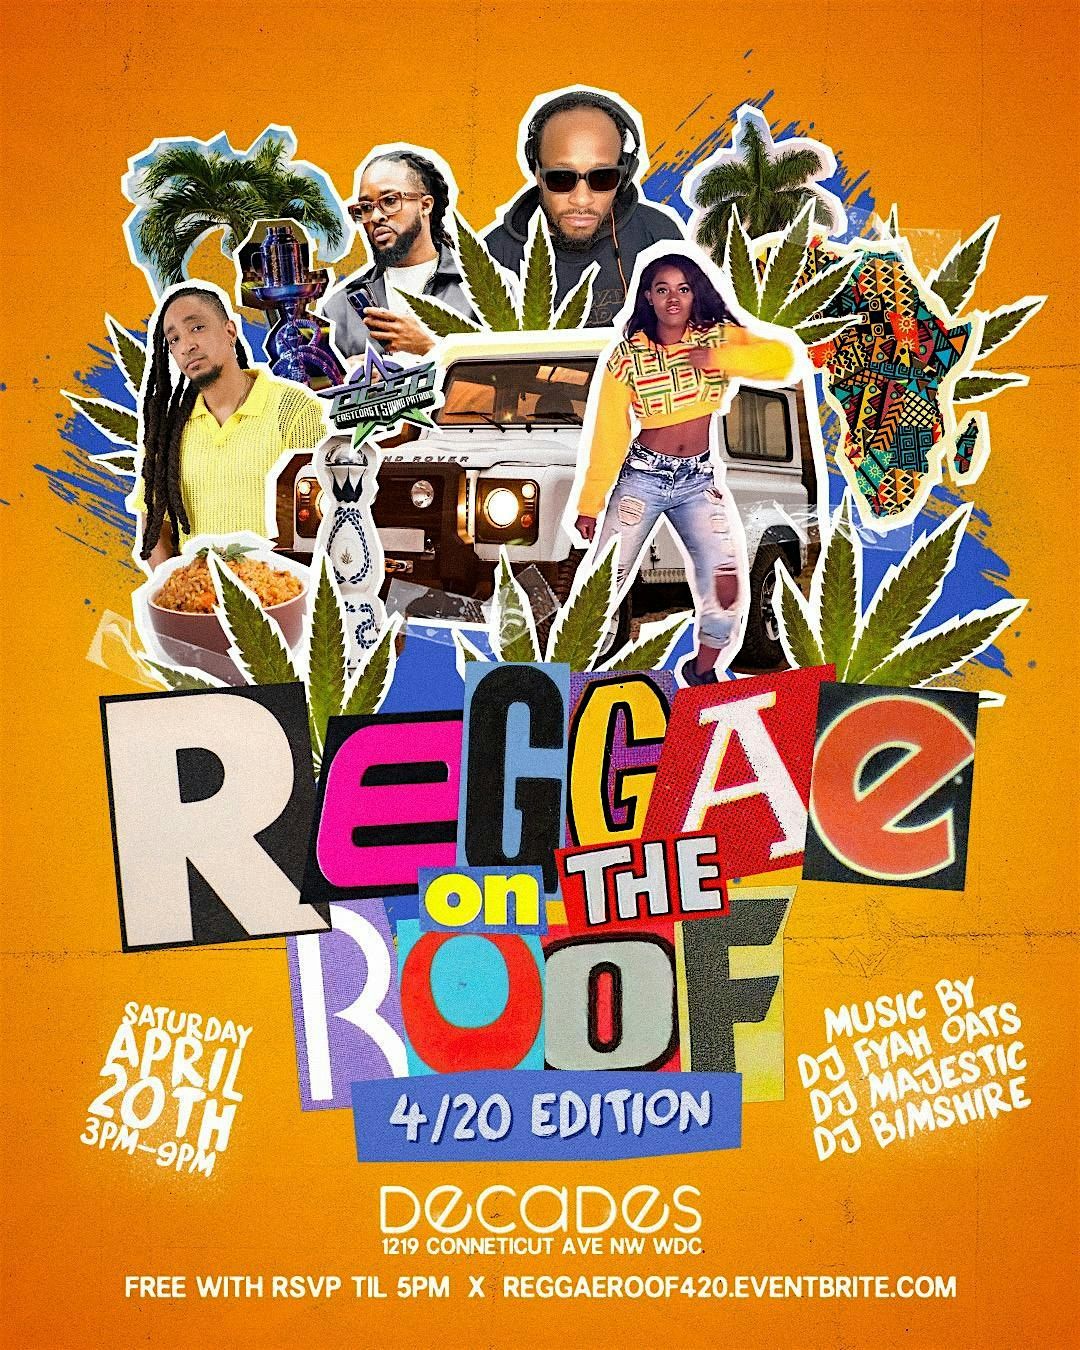 Reggae On The Roof - 4\/20 Edition At Decades